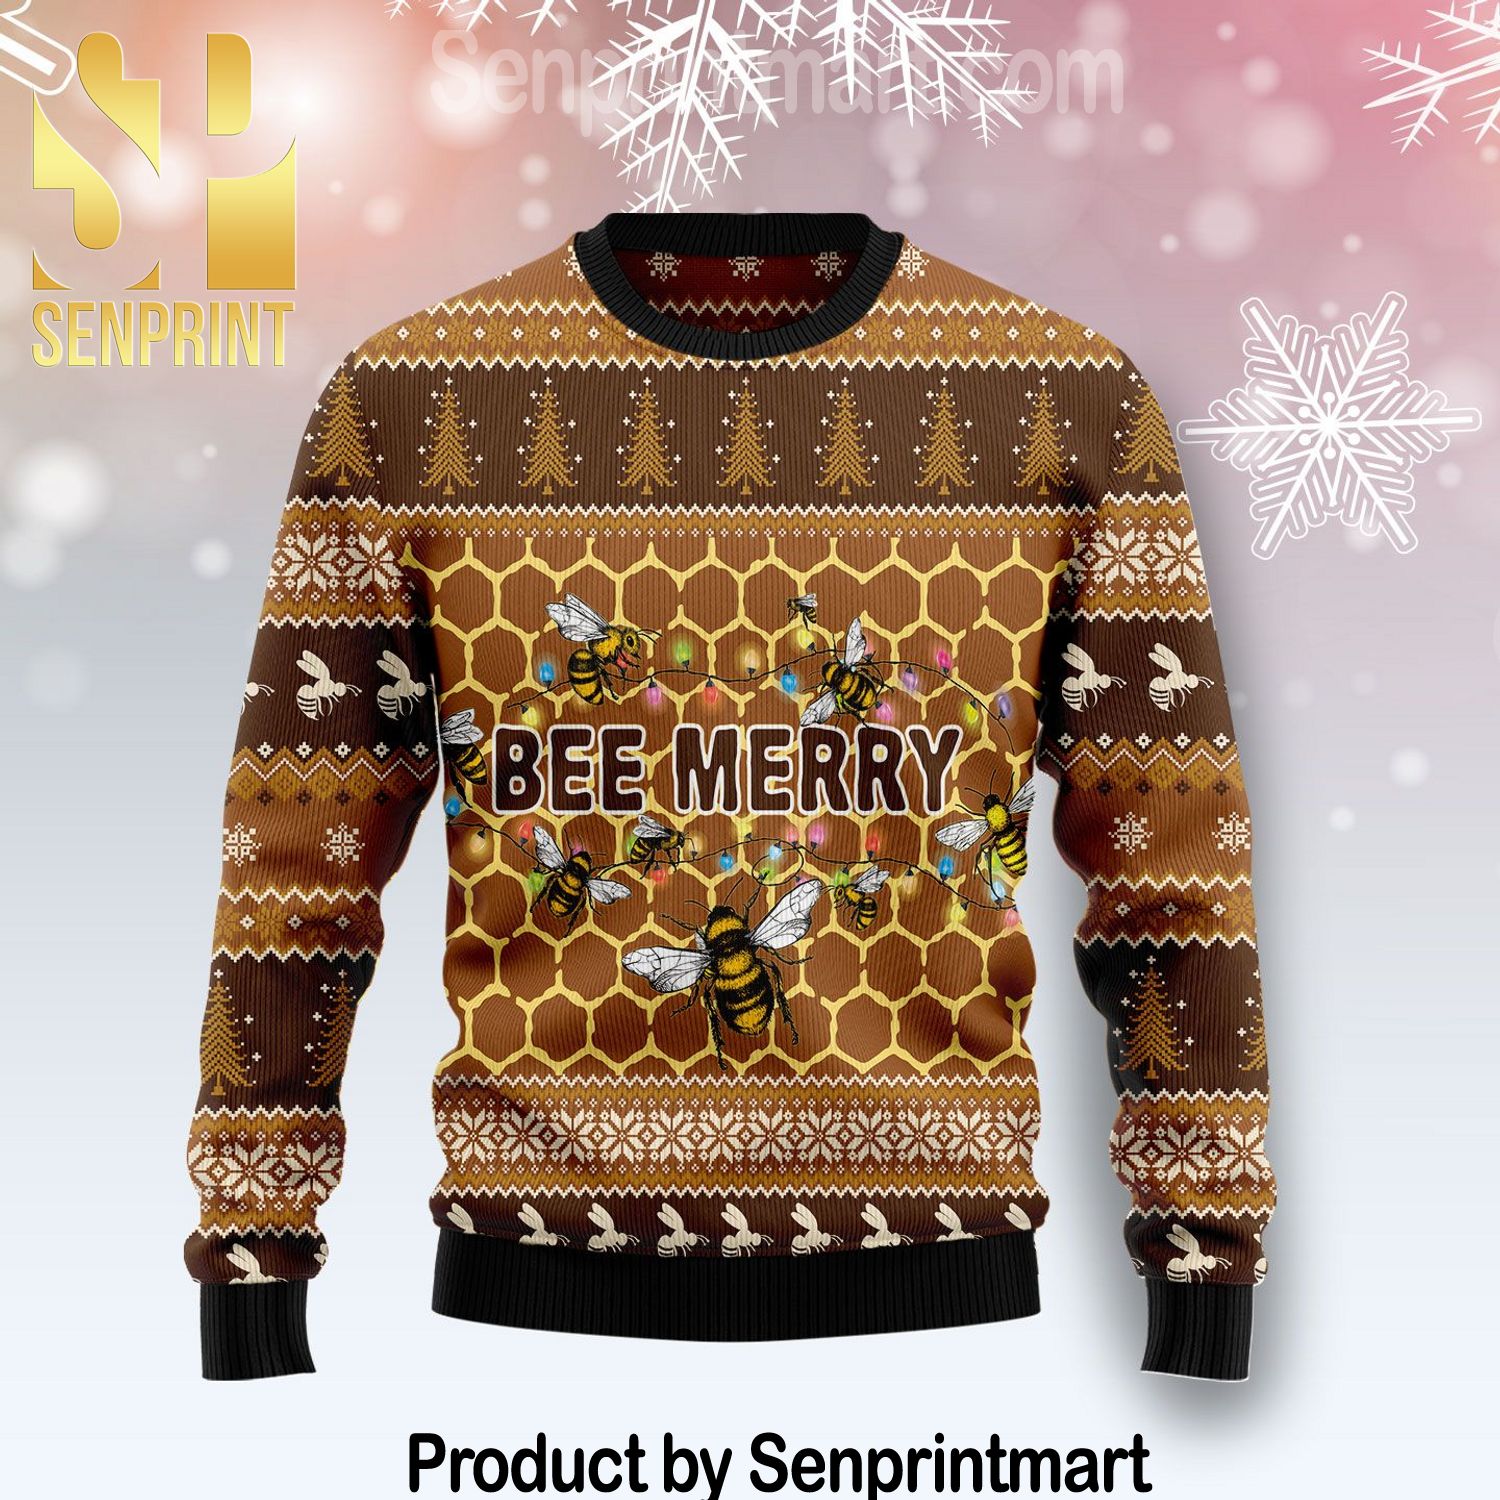 Bee Merry Chirtmas Gifts Full Printing Wool Knitted Ugly Christmas Sweater